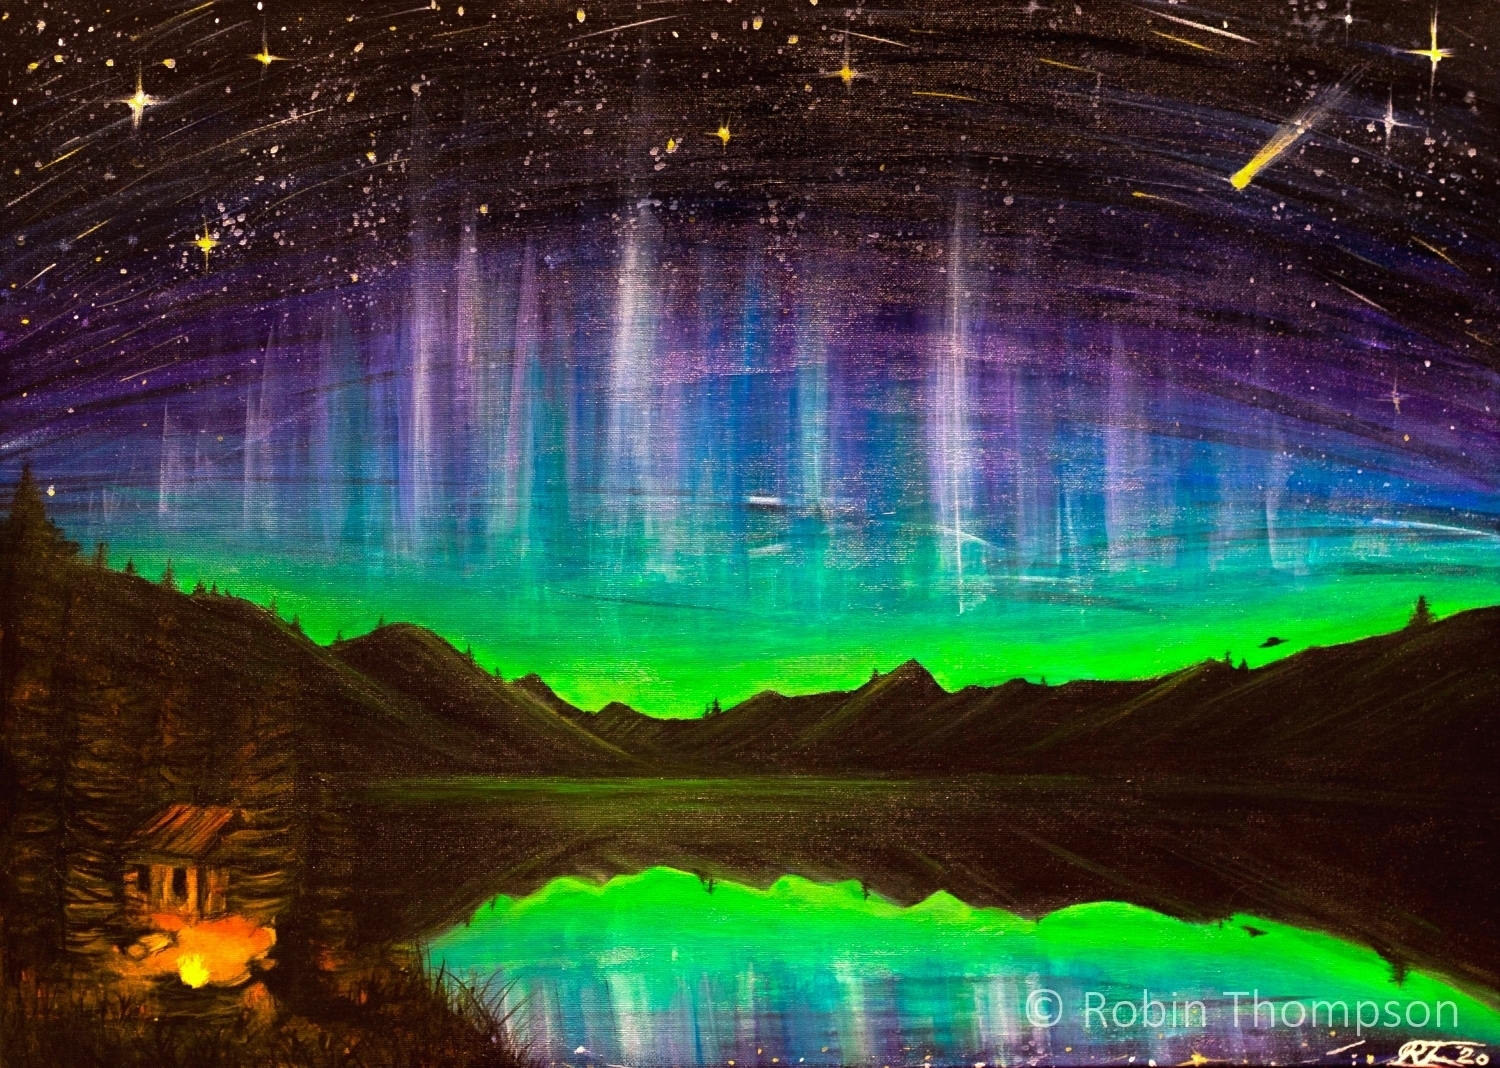 An acrylic painting of a beautiful aurora over a large lake, with mountains in the background and a man sitting next to a fire near his hut in the foreground. Stars shine bright in the dark background, and greens/blues/purples dominate the midground aurora.